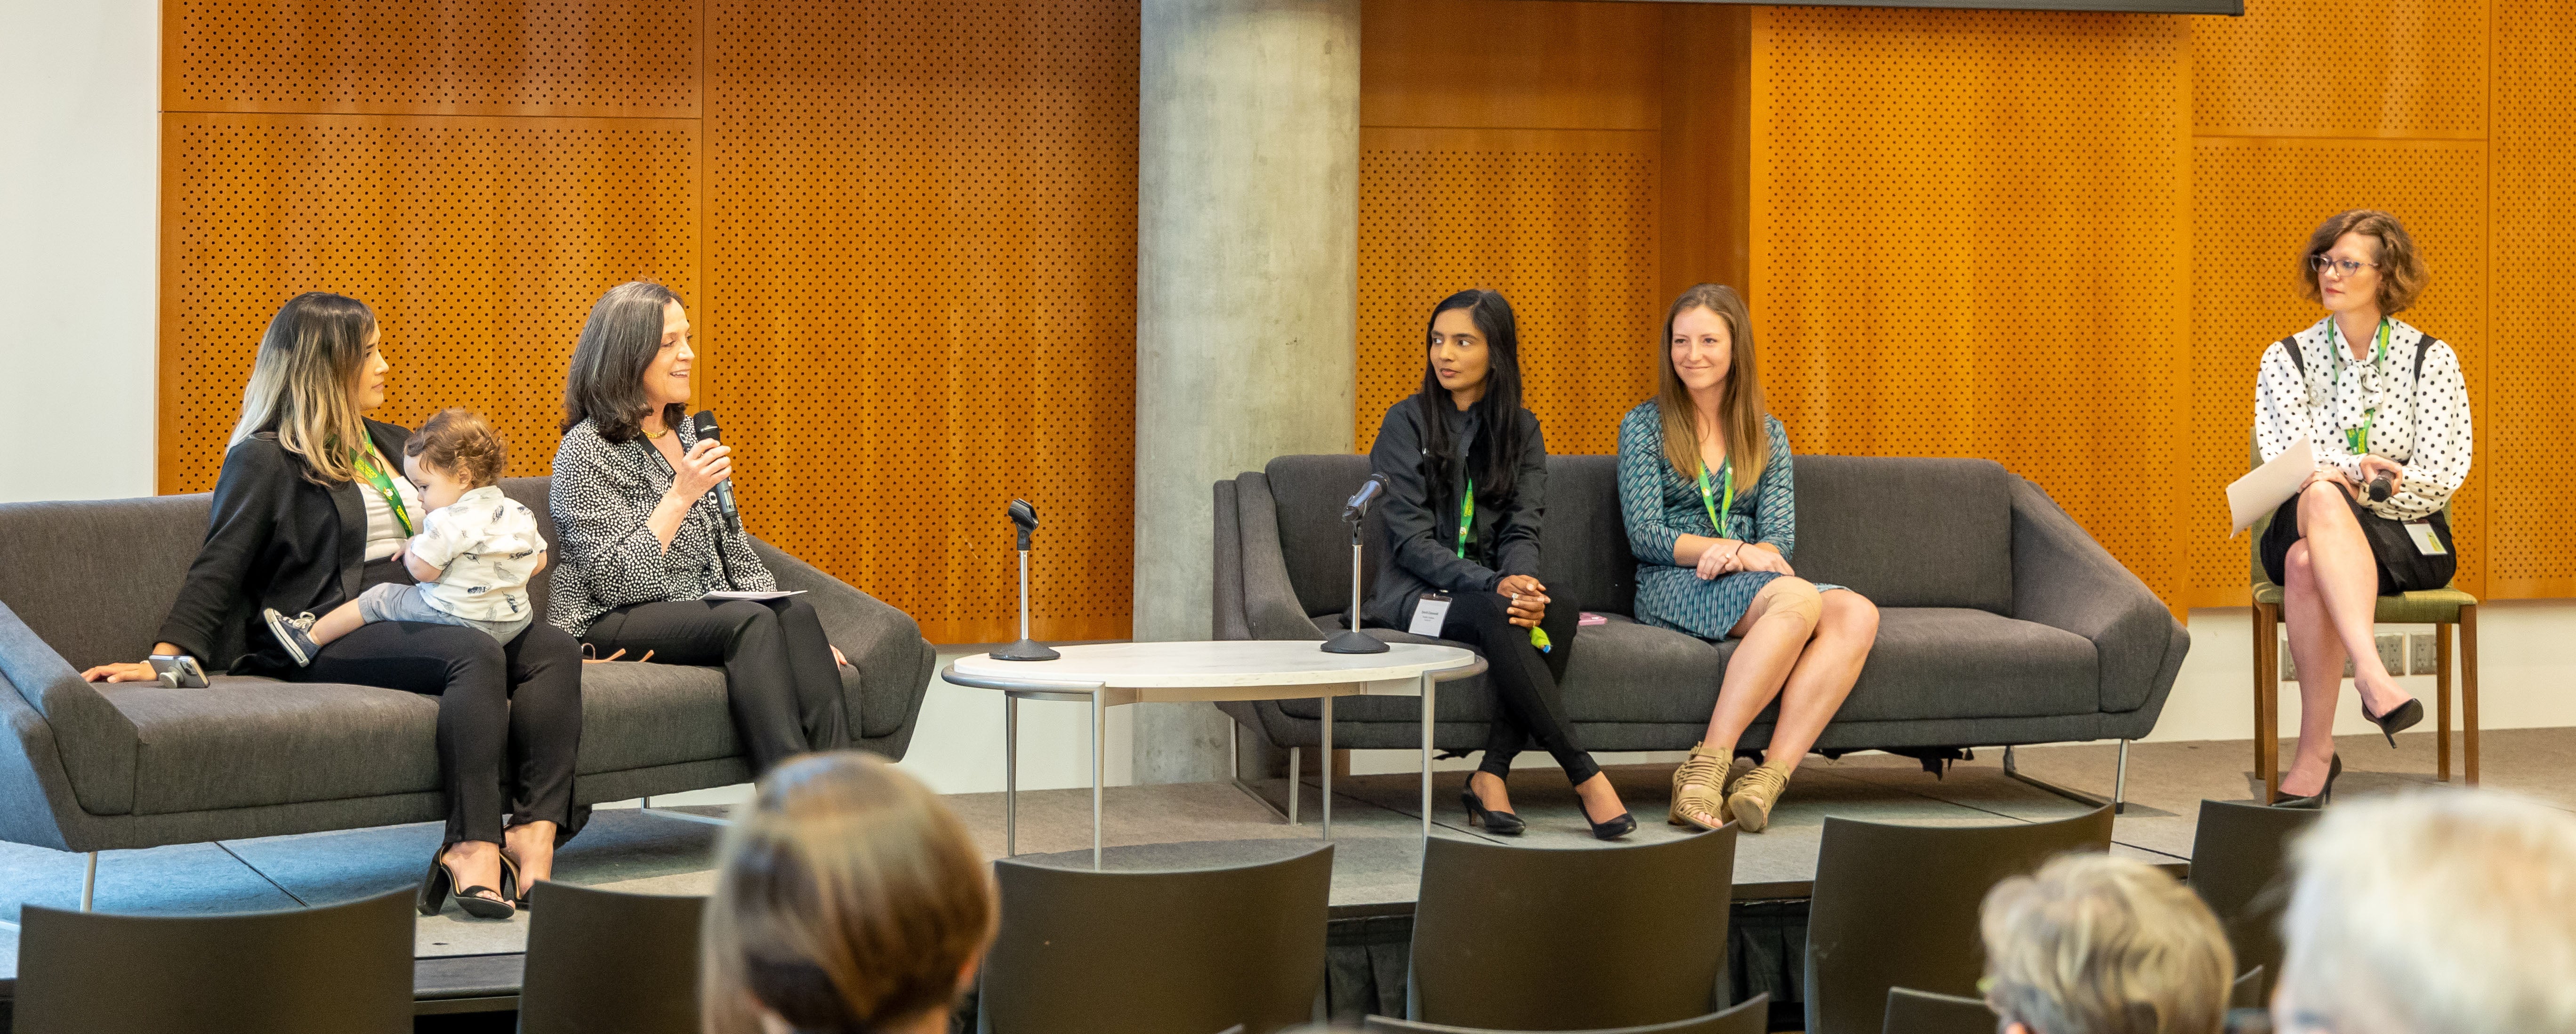 Four women participate in a panel for the women's innovation network seminar series. One woman has a small child on her lap and another woman is speaking into a microphone. A moderator is seated to the right of the panel. The audience is seen in the foreground of the image.